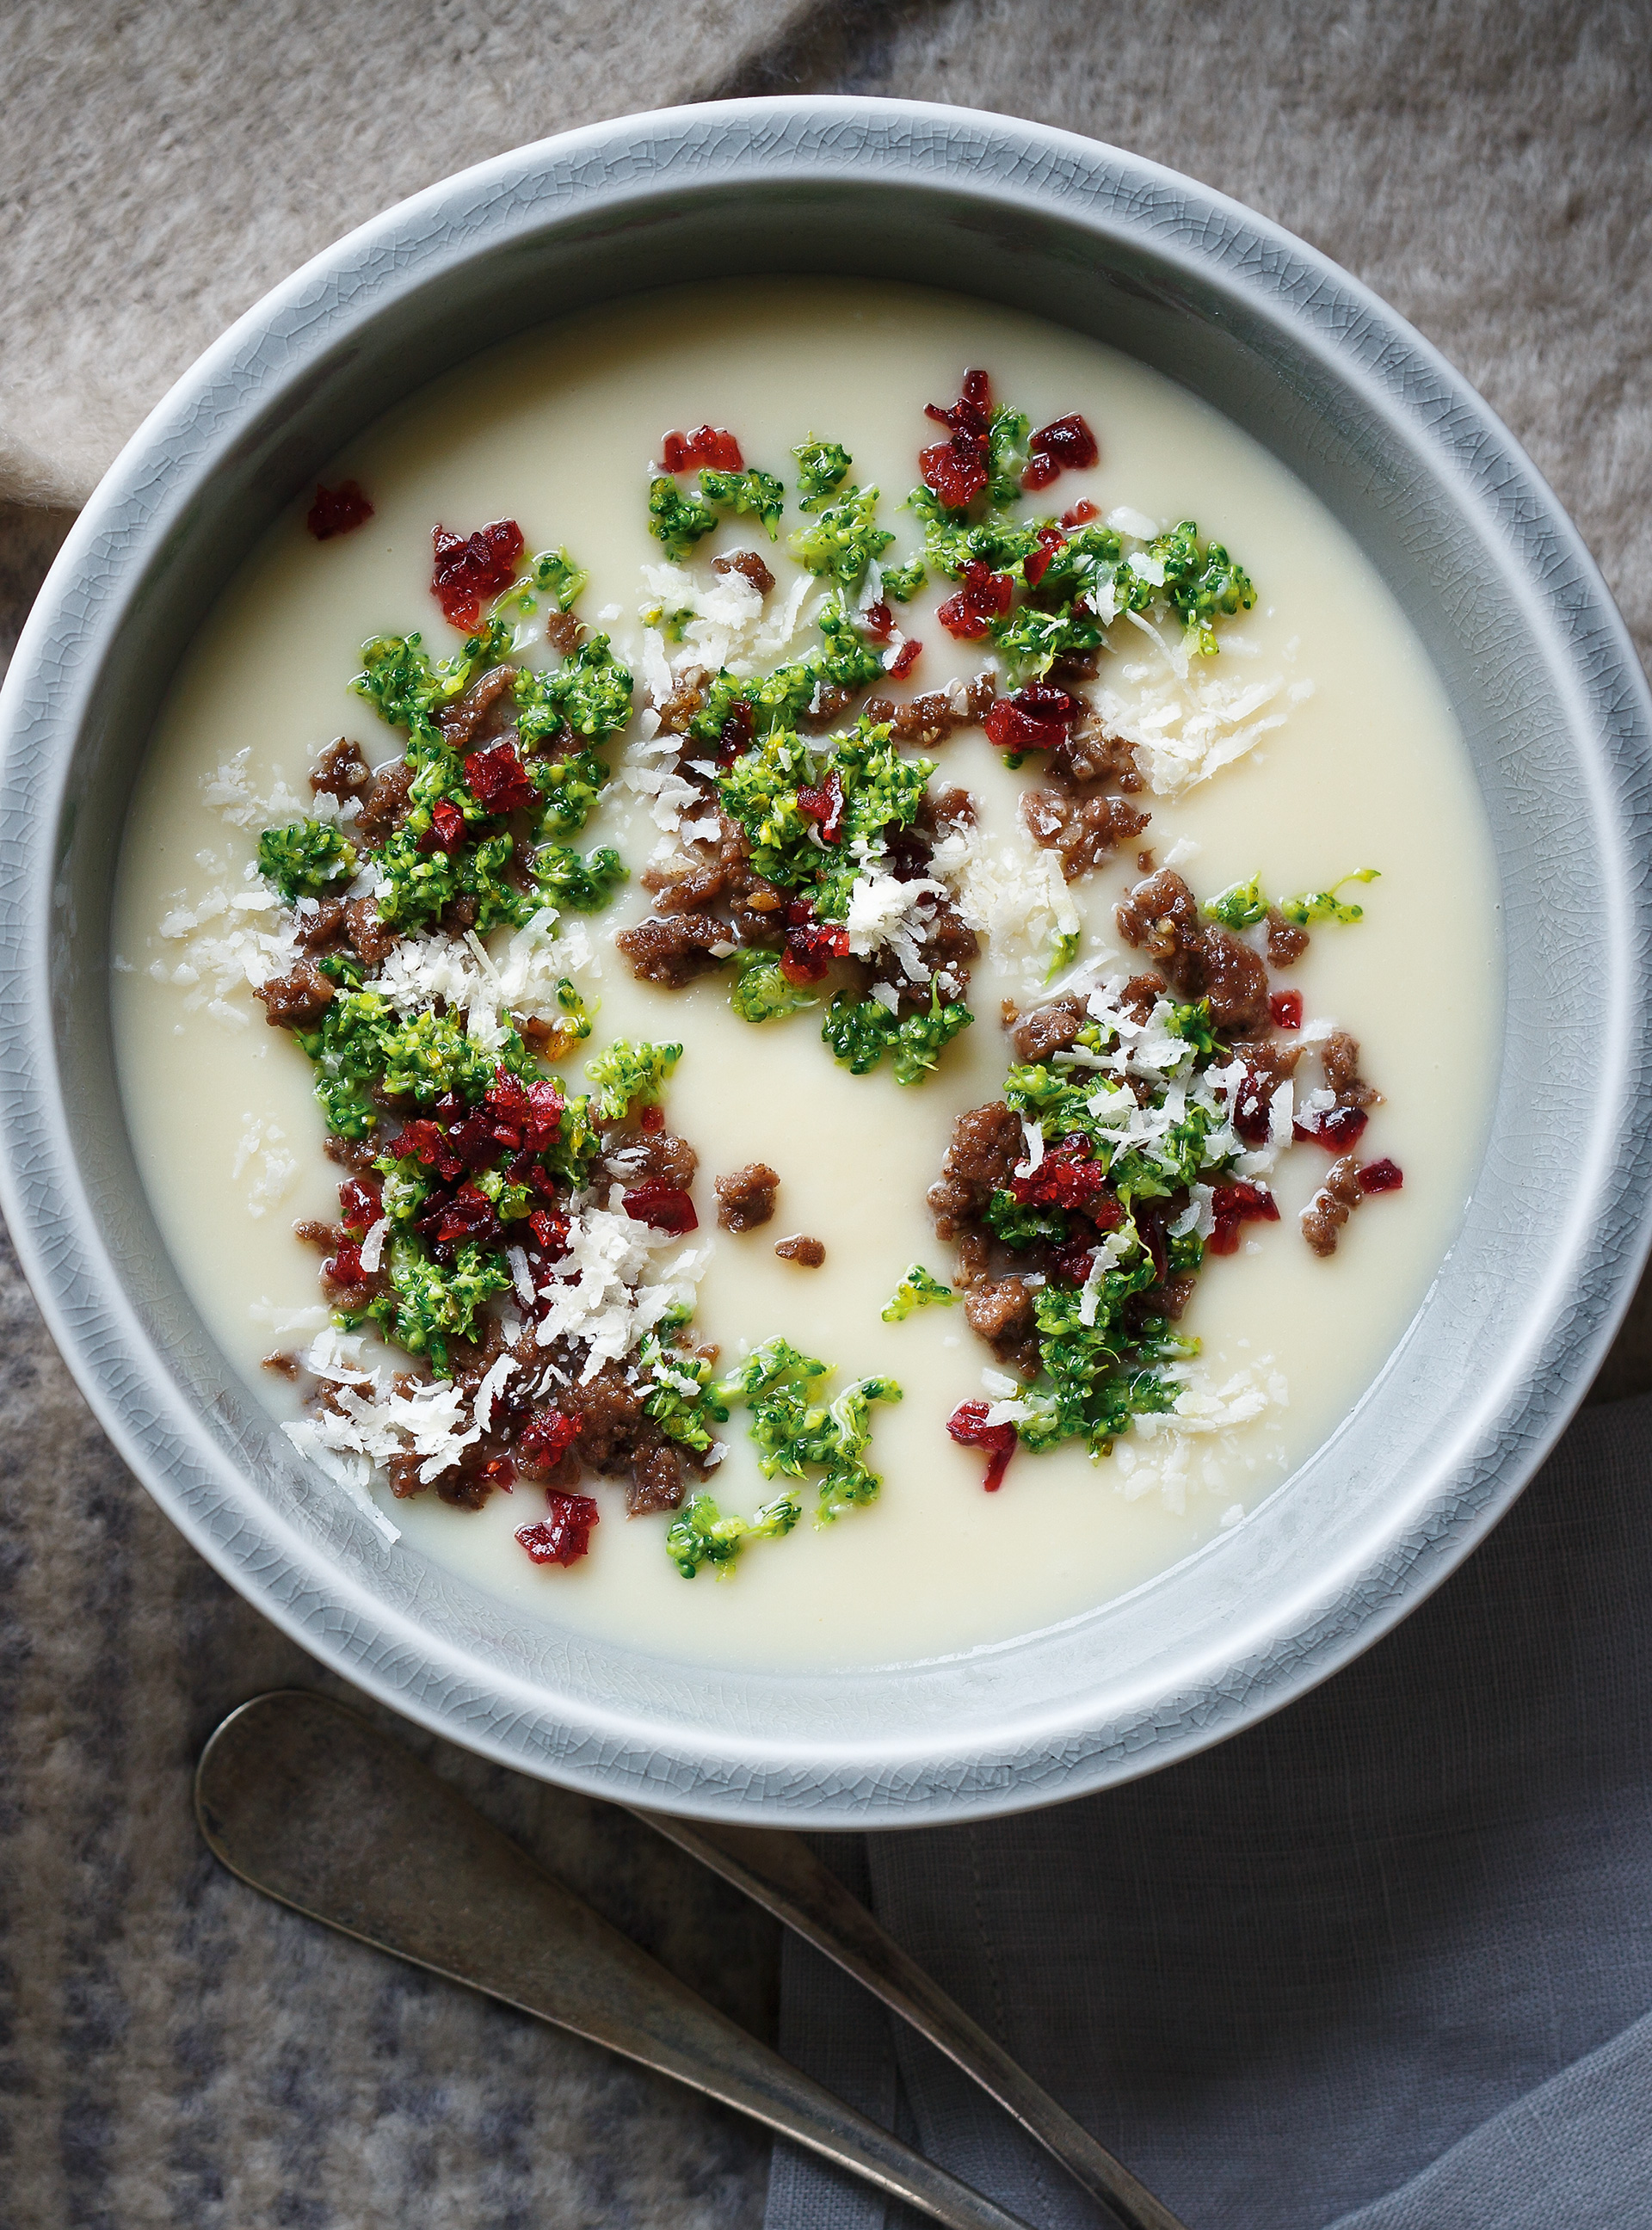 Cream of Parsnip Soup with Venison, Broccoli and Cranberries